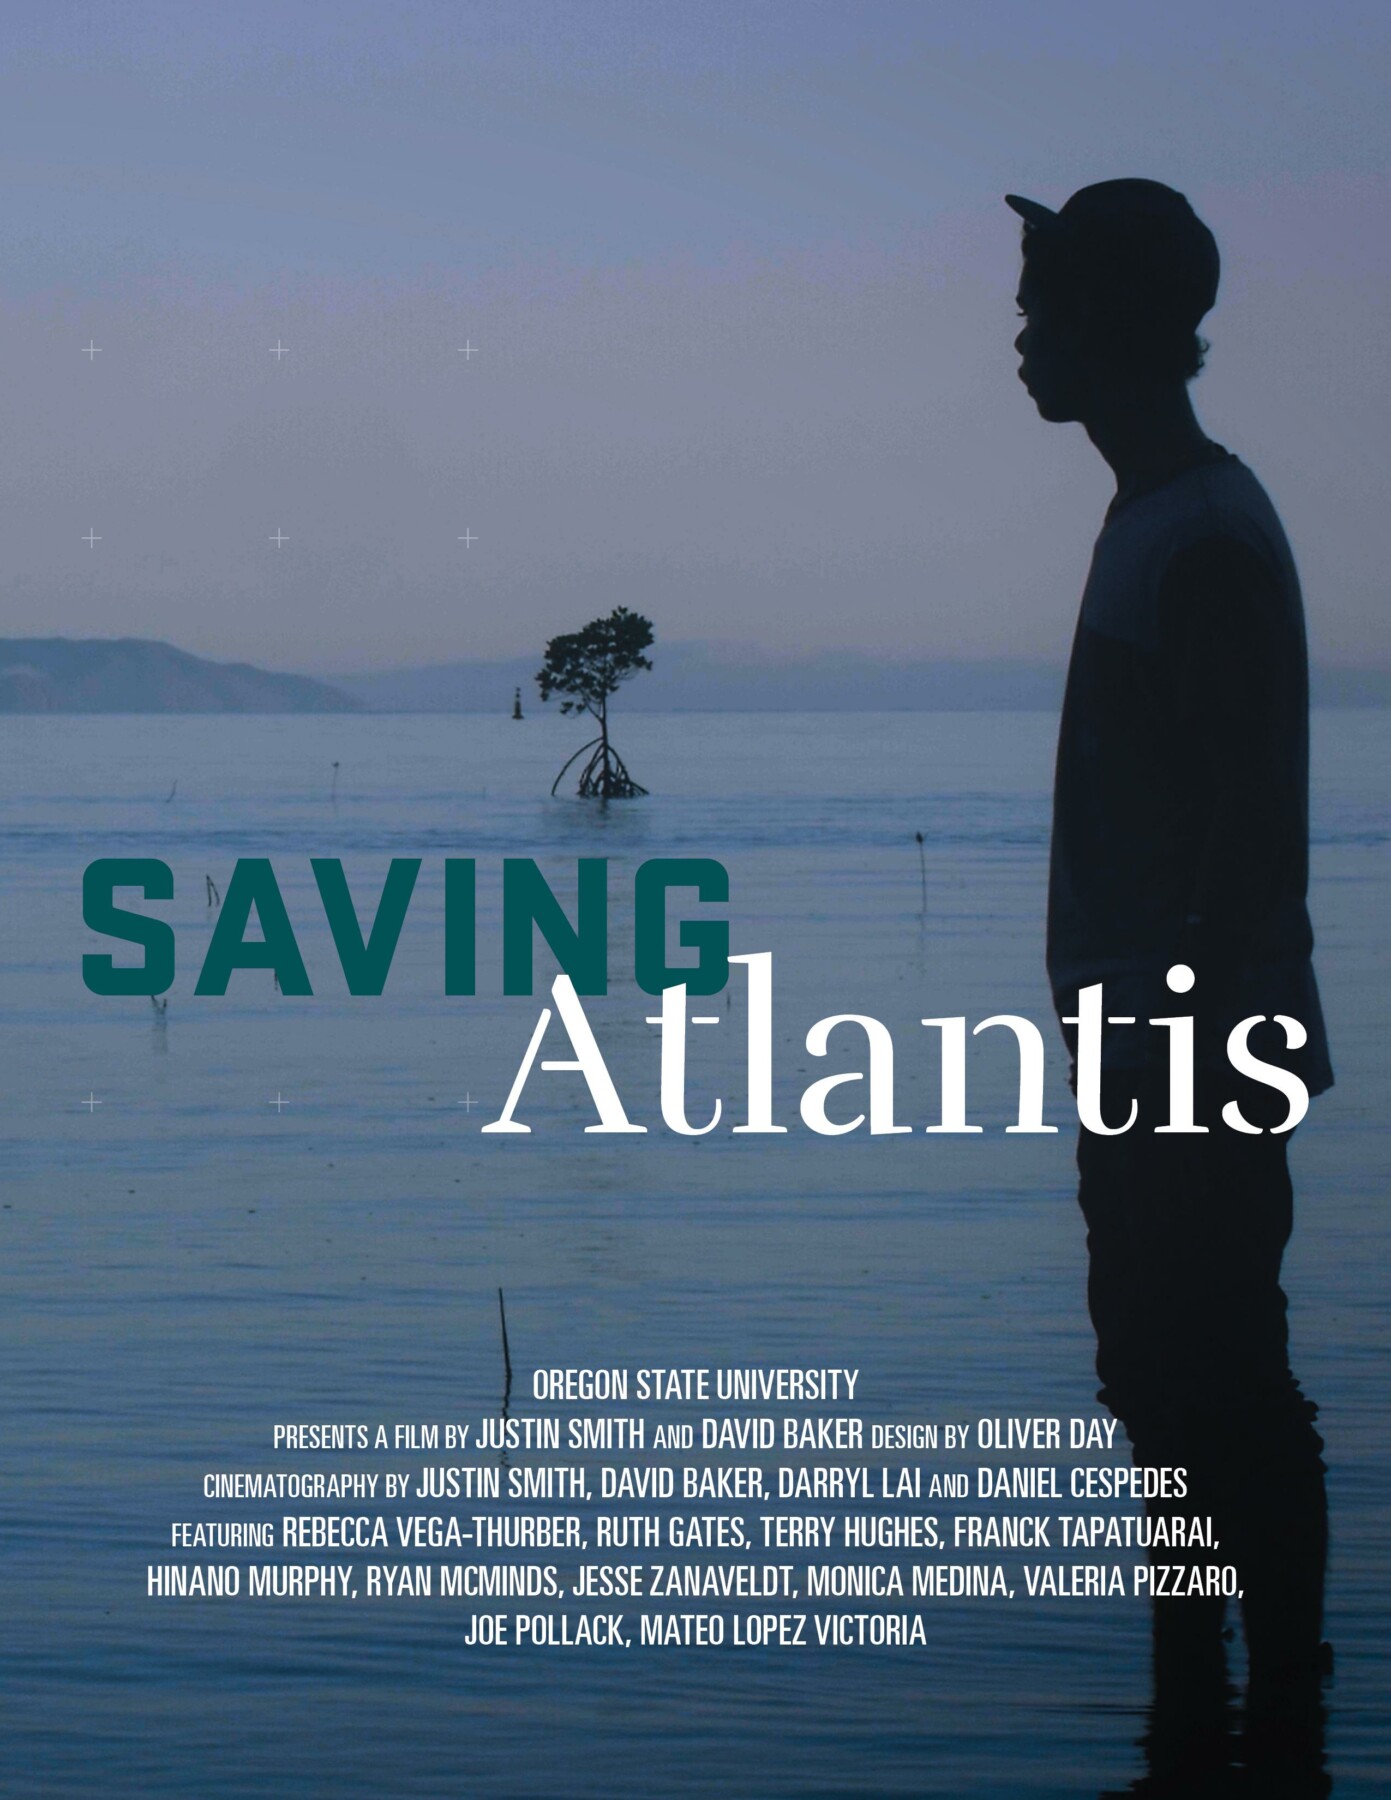 documentary poster. Silhouette of a person with ocean in the background